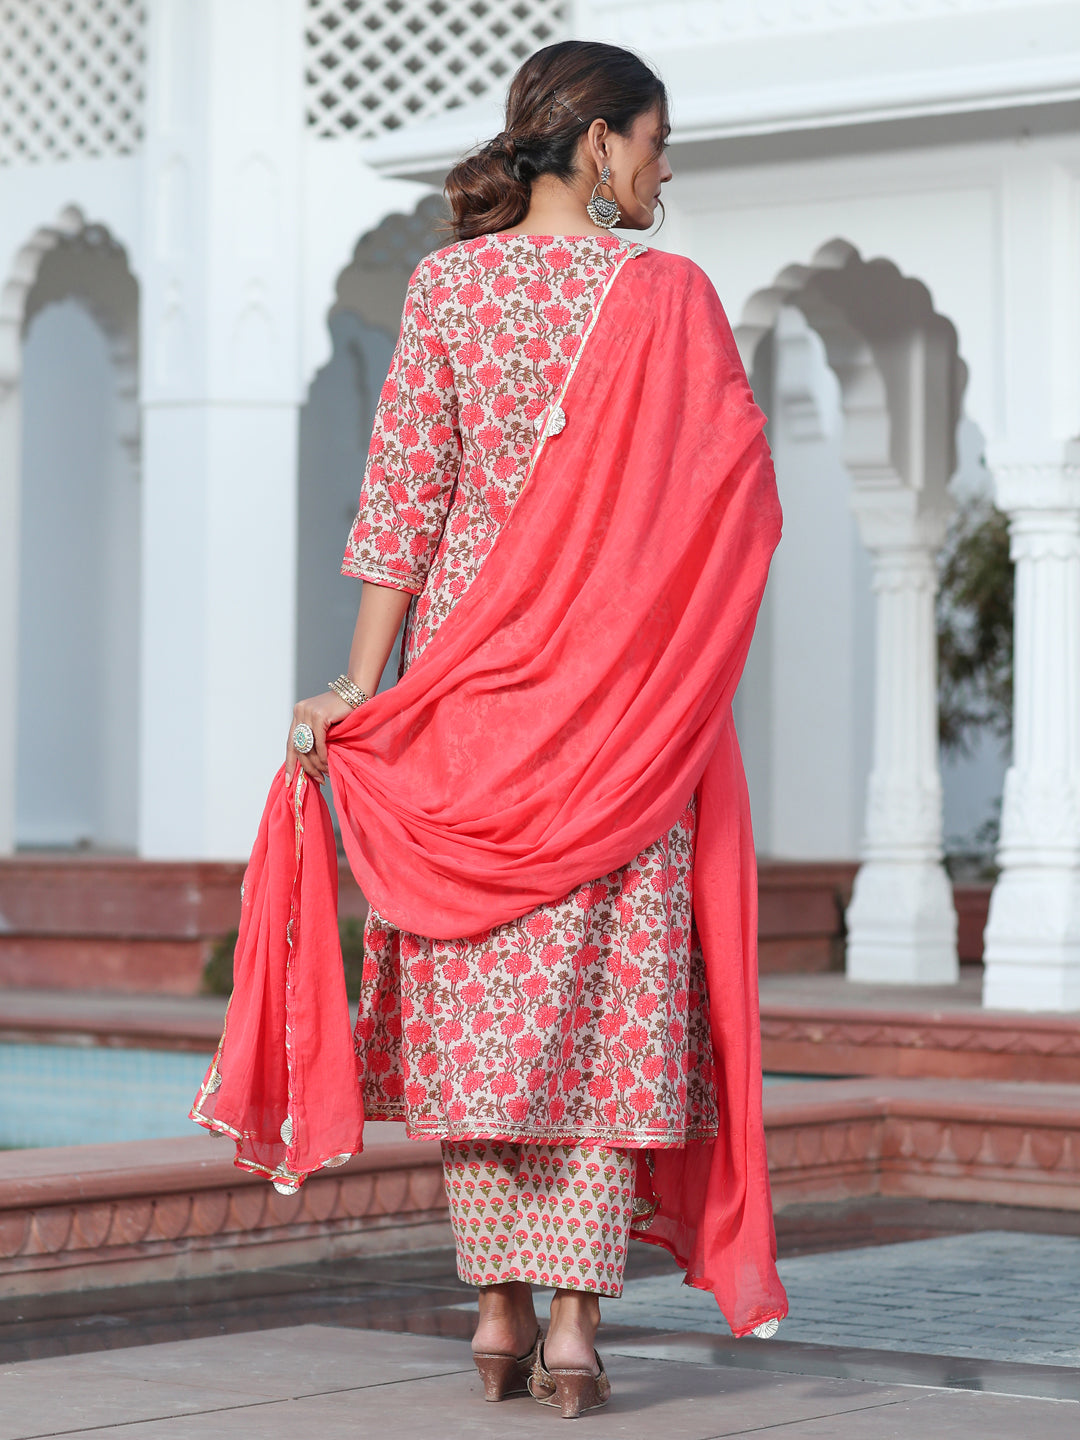 A Peach Printed Cotton Embellished Anarkali Suit With Pants And Crushed Cotton Dupatta